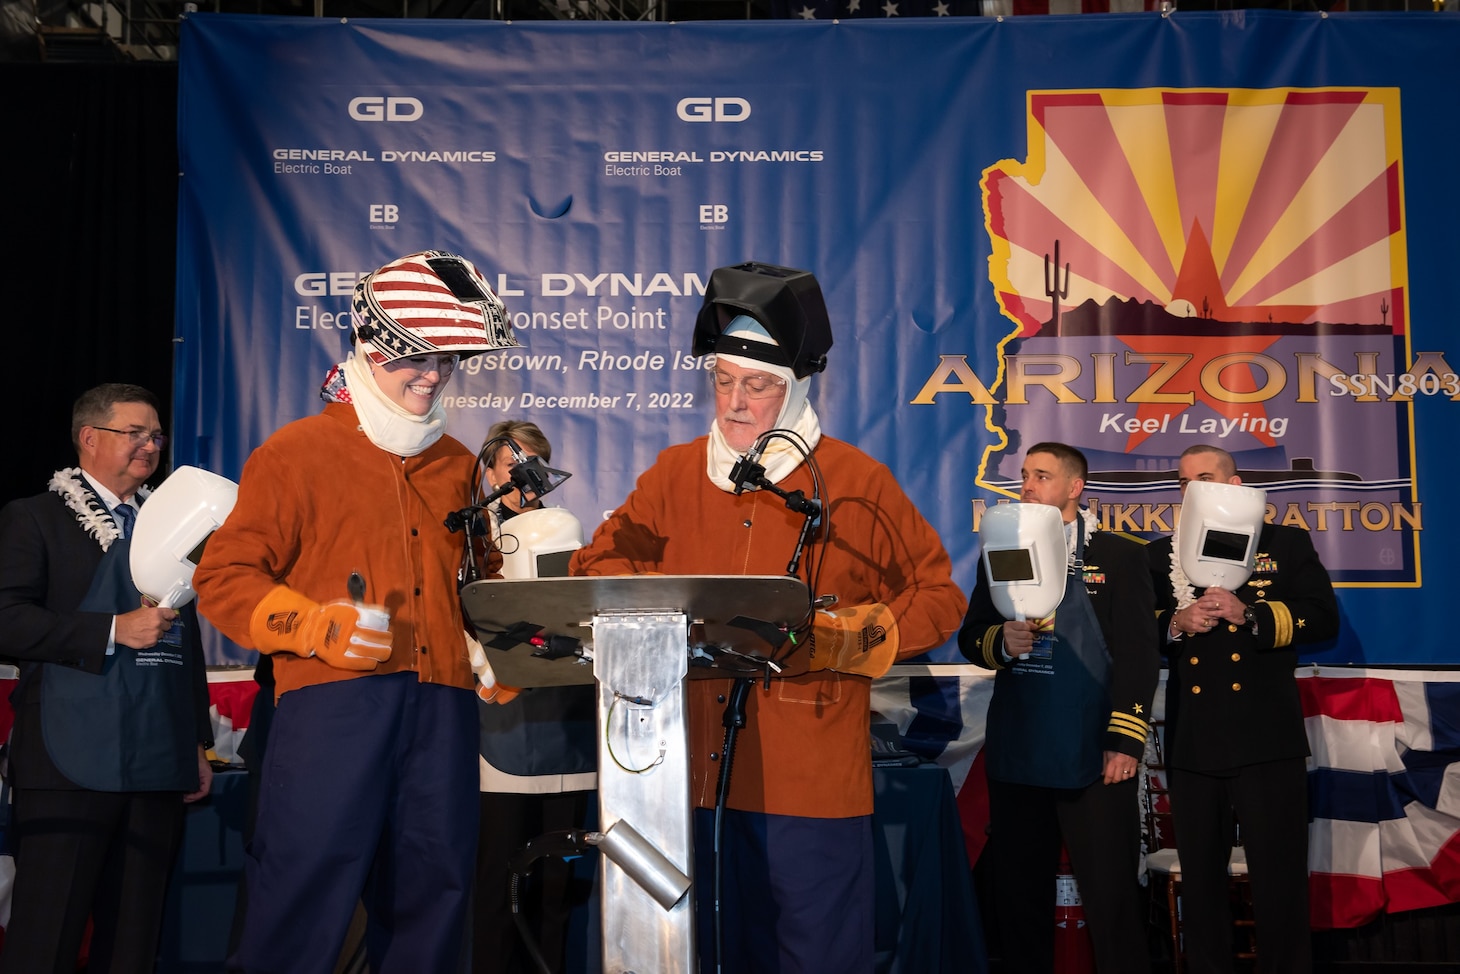 Ship Sponsor Nikki Stratton (left foreground) and Electric Boat welder Bob Hobday prepare to weld Stratton's initials into a plate
that will be placed on the future USS Arizona (SSN 803), during the boat's keel authentication ceremony at the Electric Boat Quonset Point Facility in North Kingstown, R.I., Dec. 7.